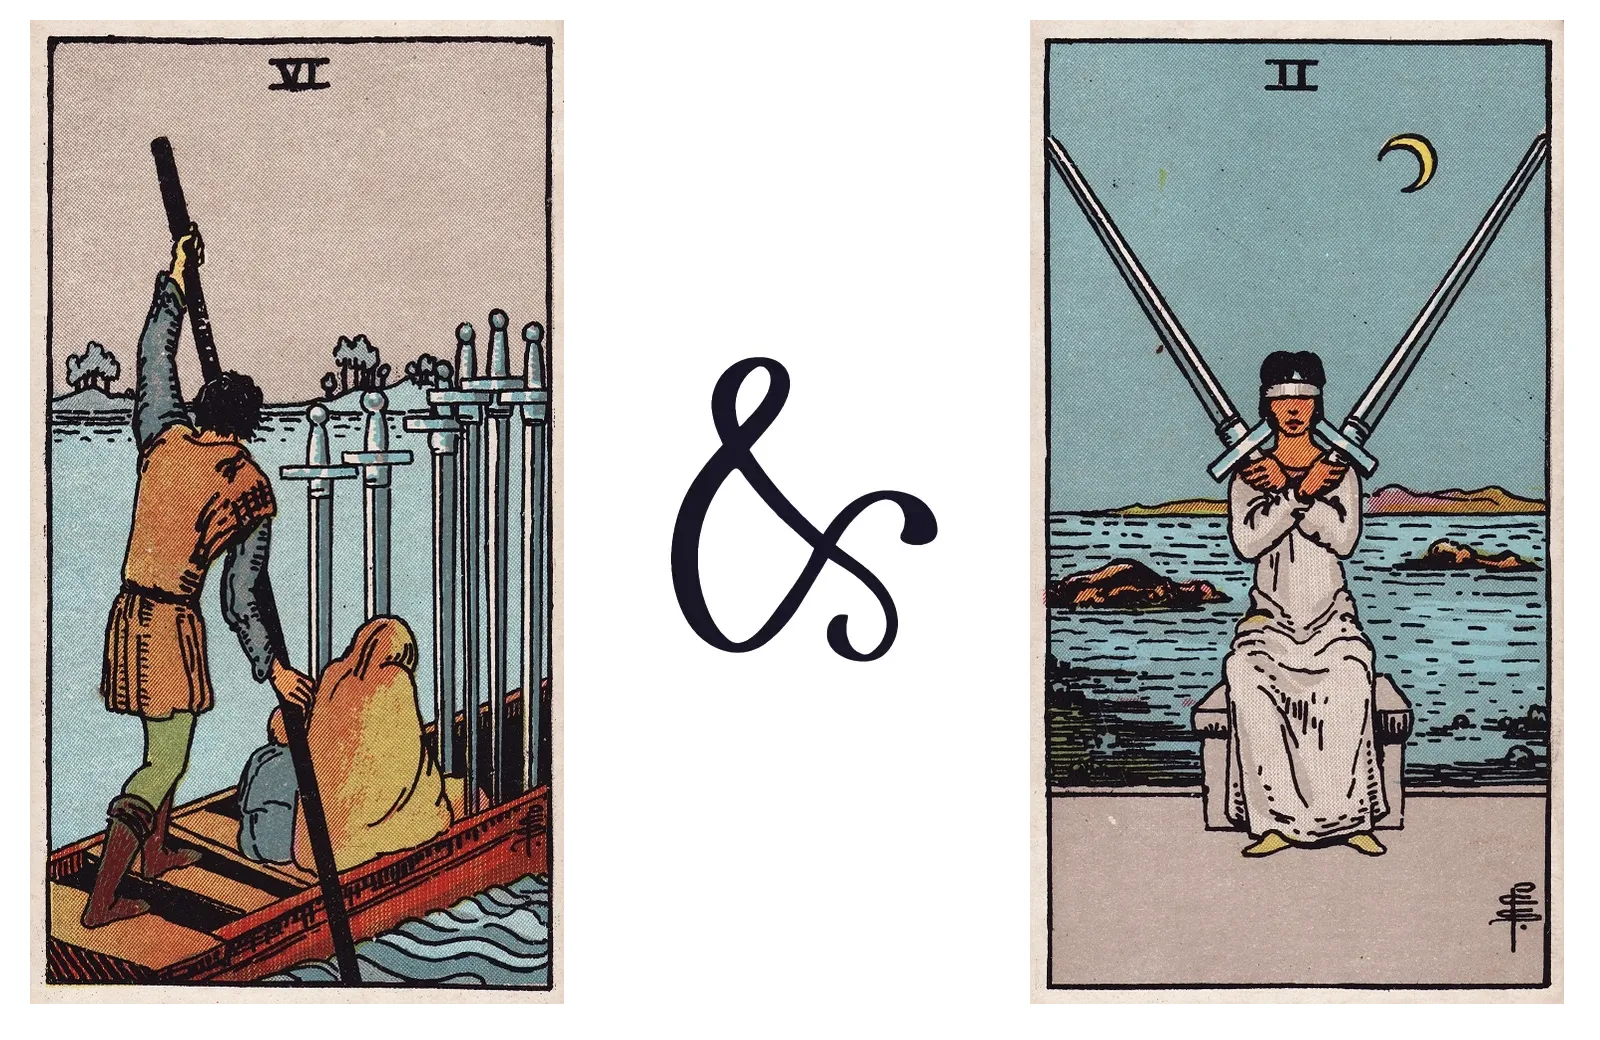 Six of Swords and Two of Swords